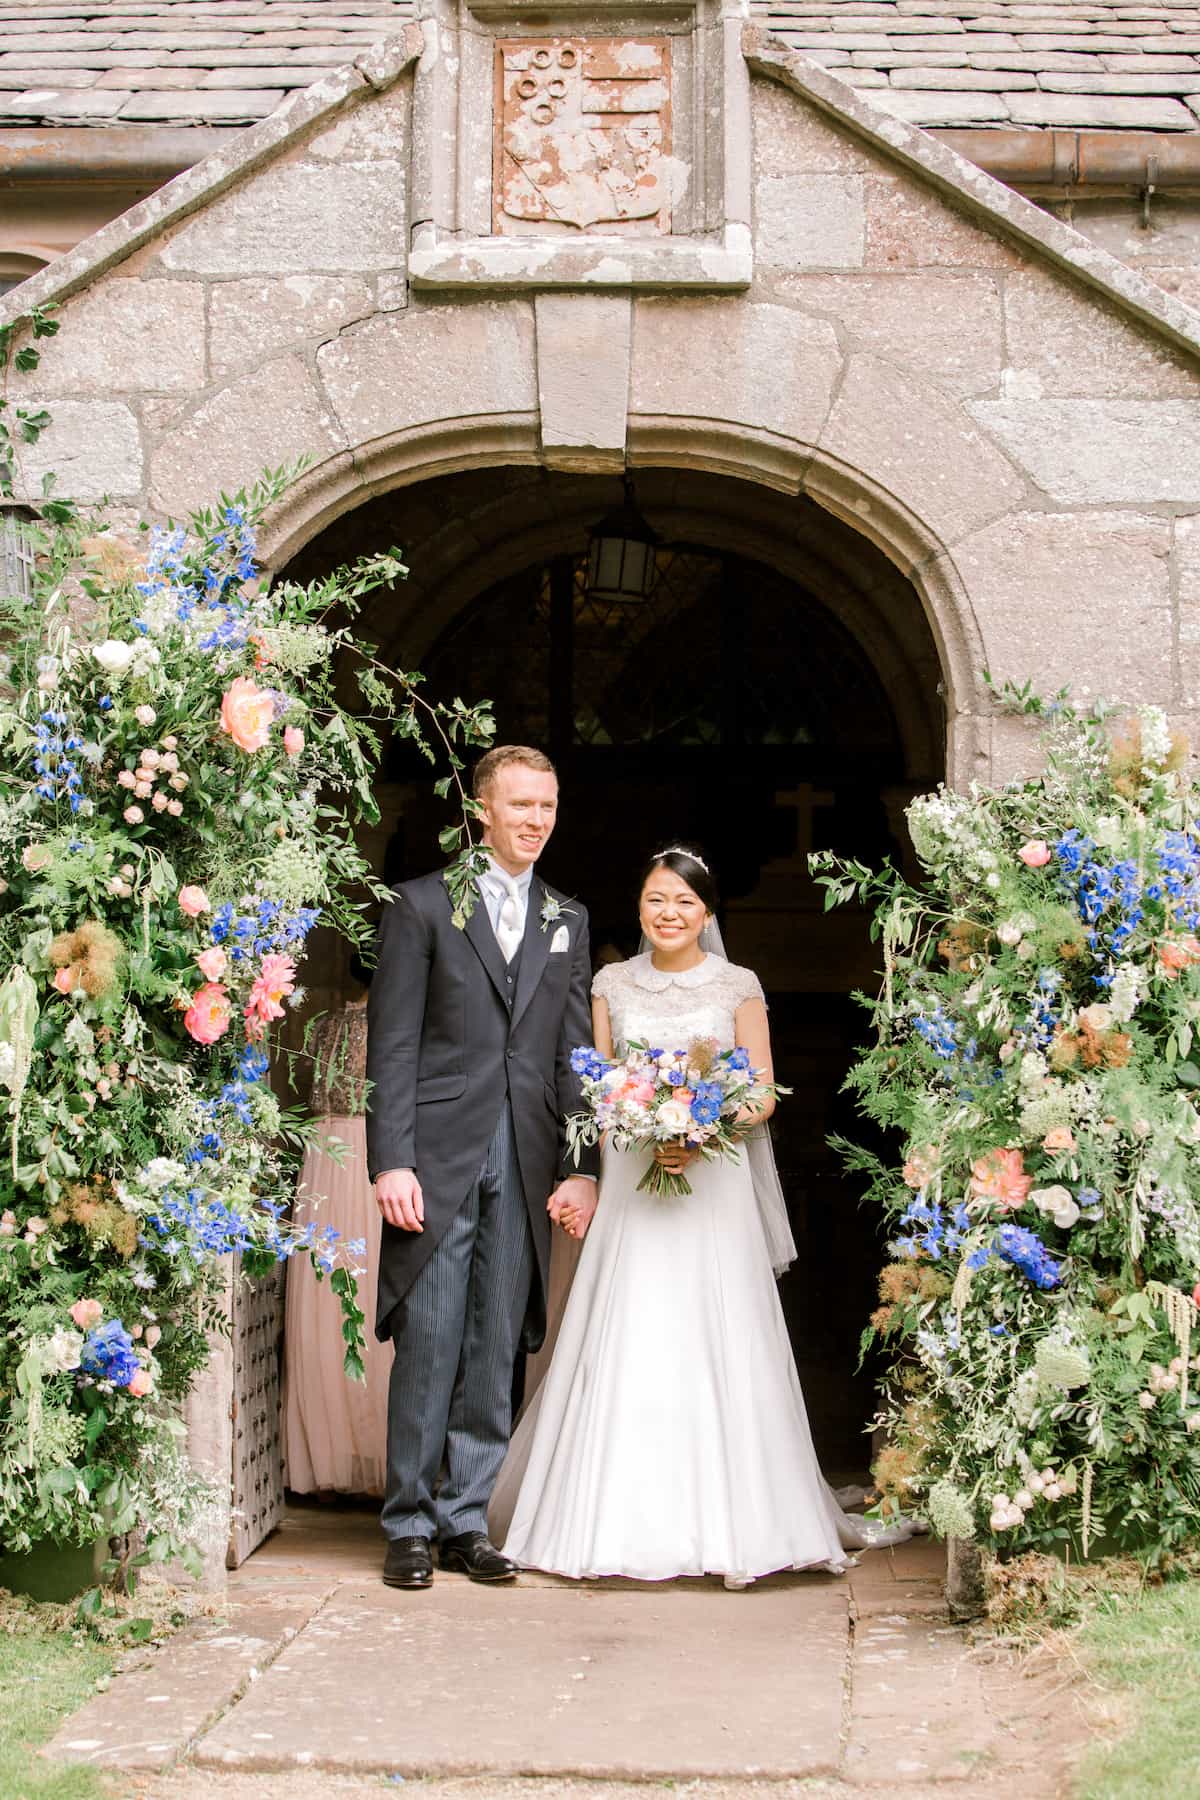 A bride and groom in a Church entrance. The bride is holding a pale blue and pink bouquet, and either side are pale blue and pink flower towers